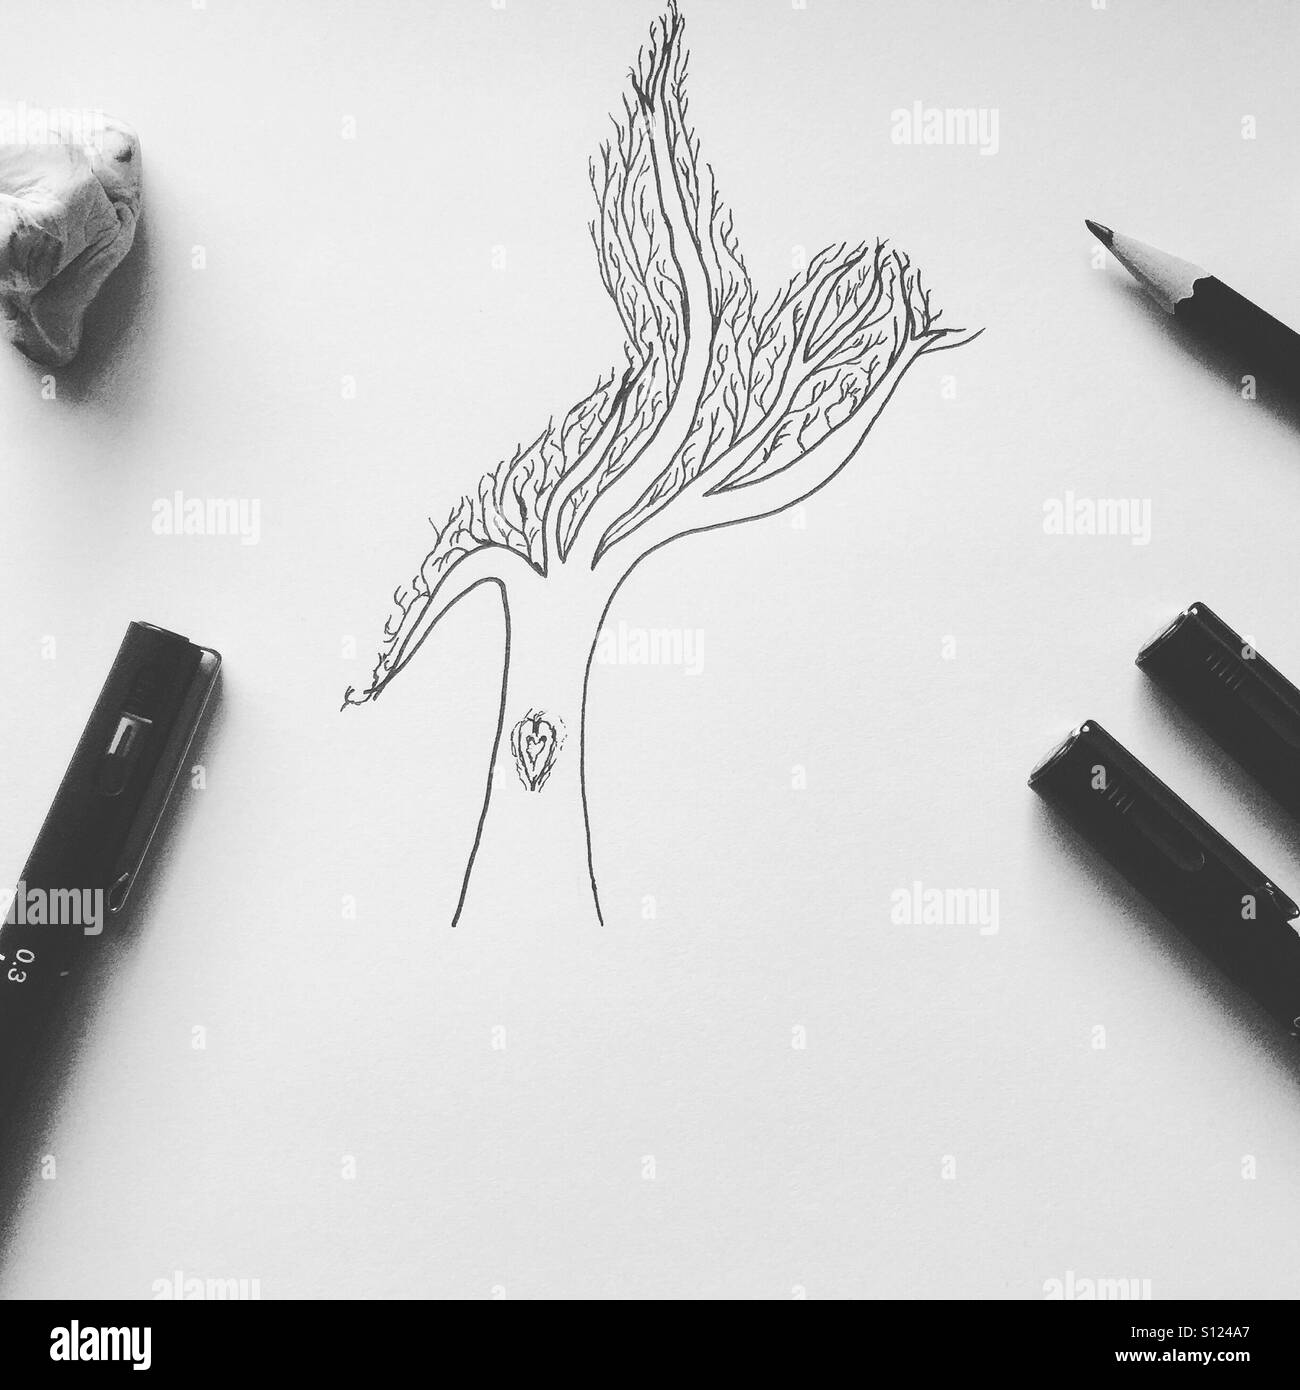 Hand drawn tree in the shape of a bird Stock Photo